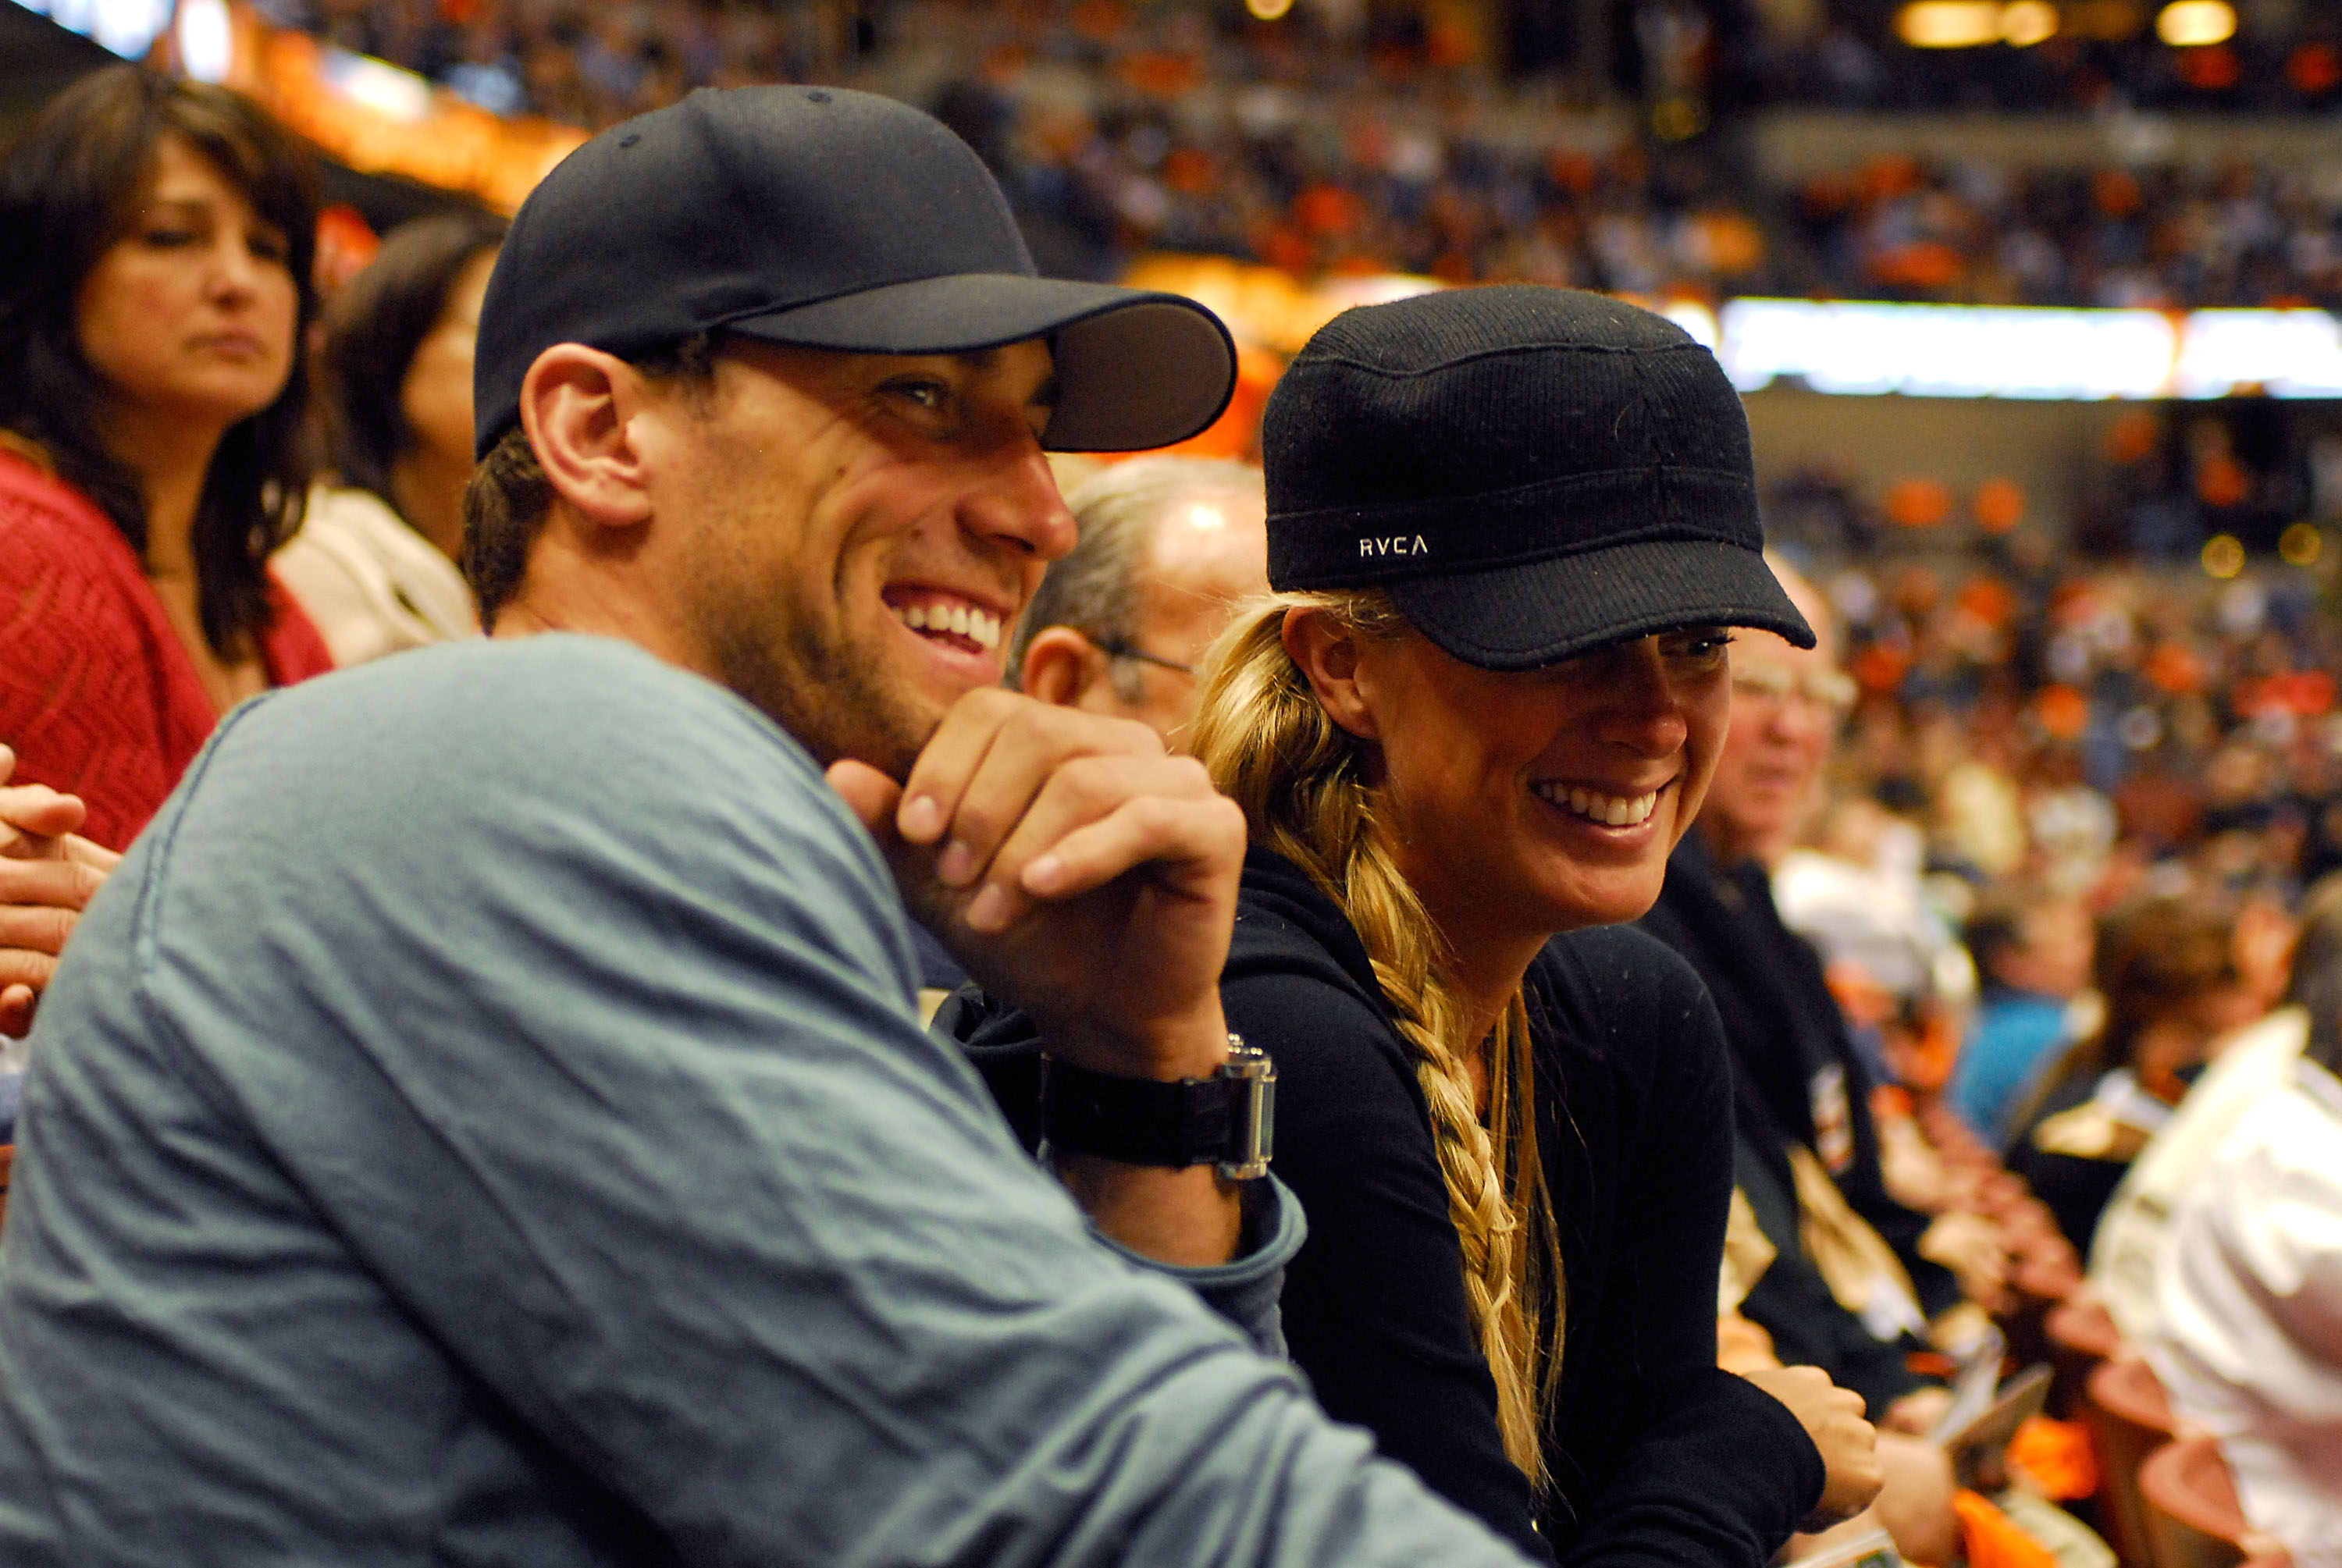 Rachel Hunter and Jarret Stoll attend the final game of the Anaheim Ducks/Minnesota Wild hockey playoff series at the Honda Center on April 19, 2007, in Anaheim, California. | Source: Getty Images